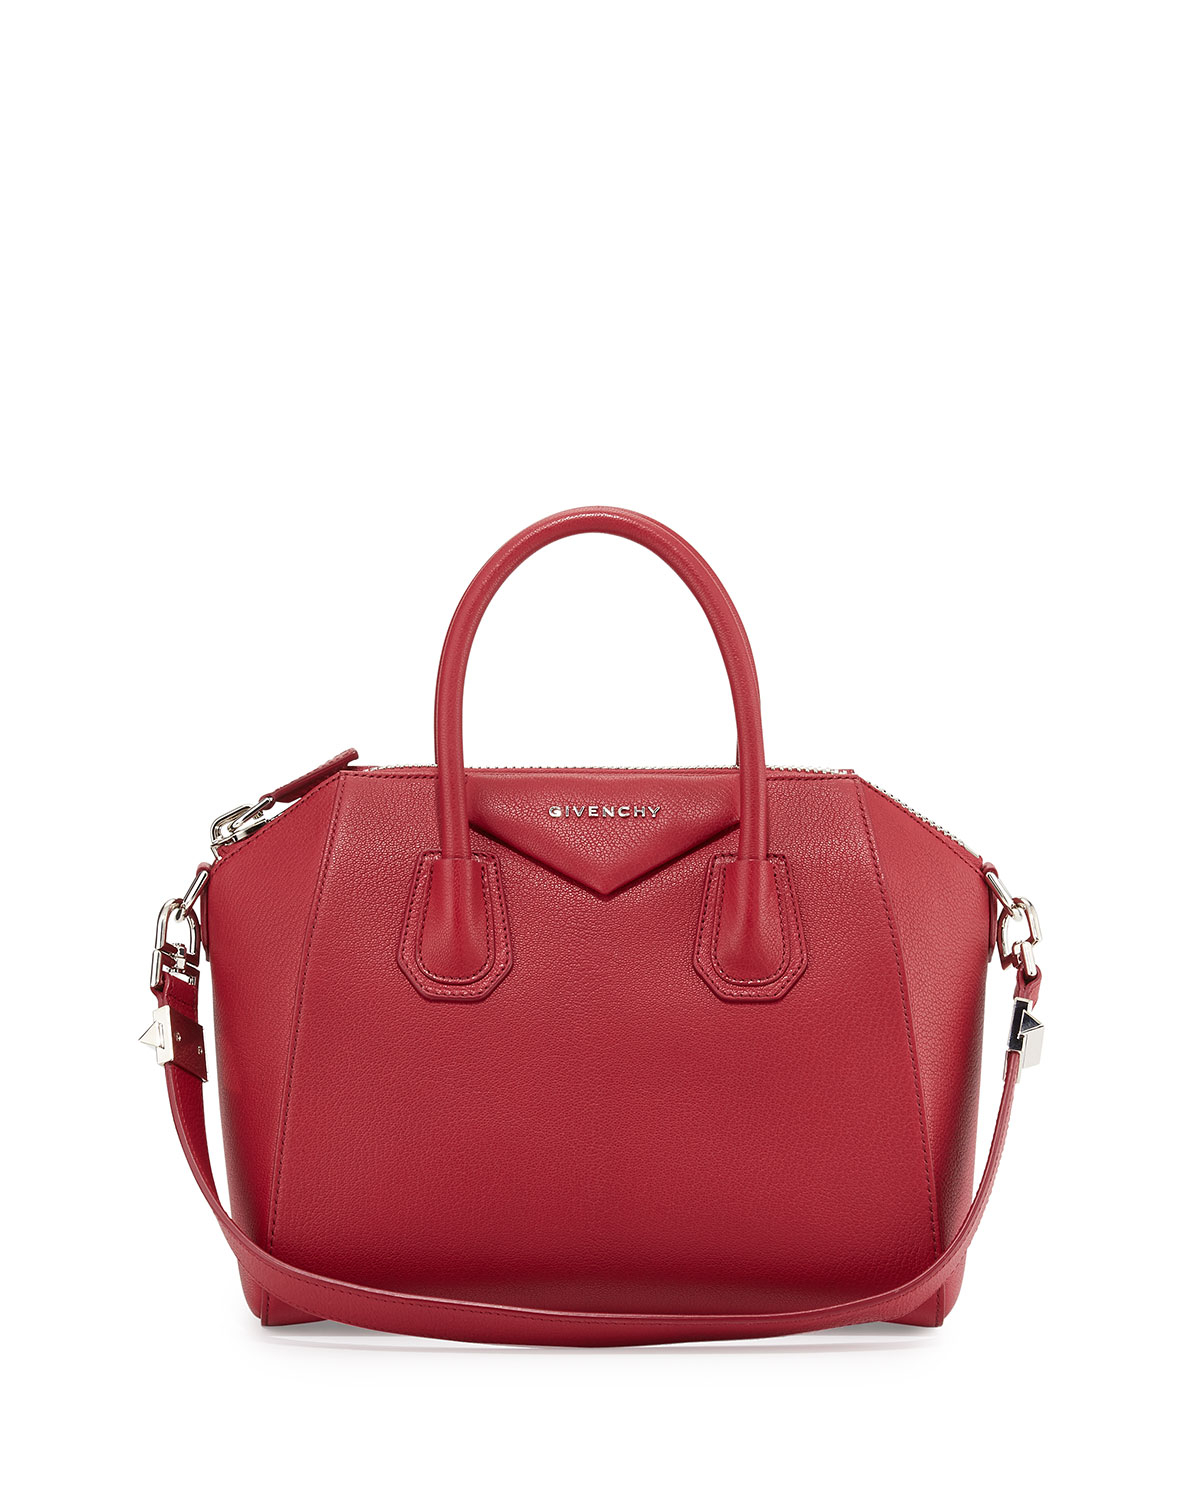 Givenchy Antigona Small Grained Leather Satchel Bag in Red | Lyst